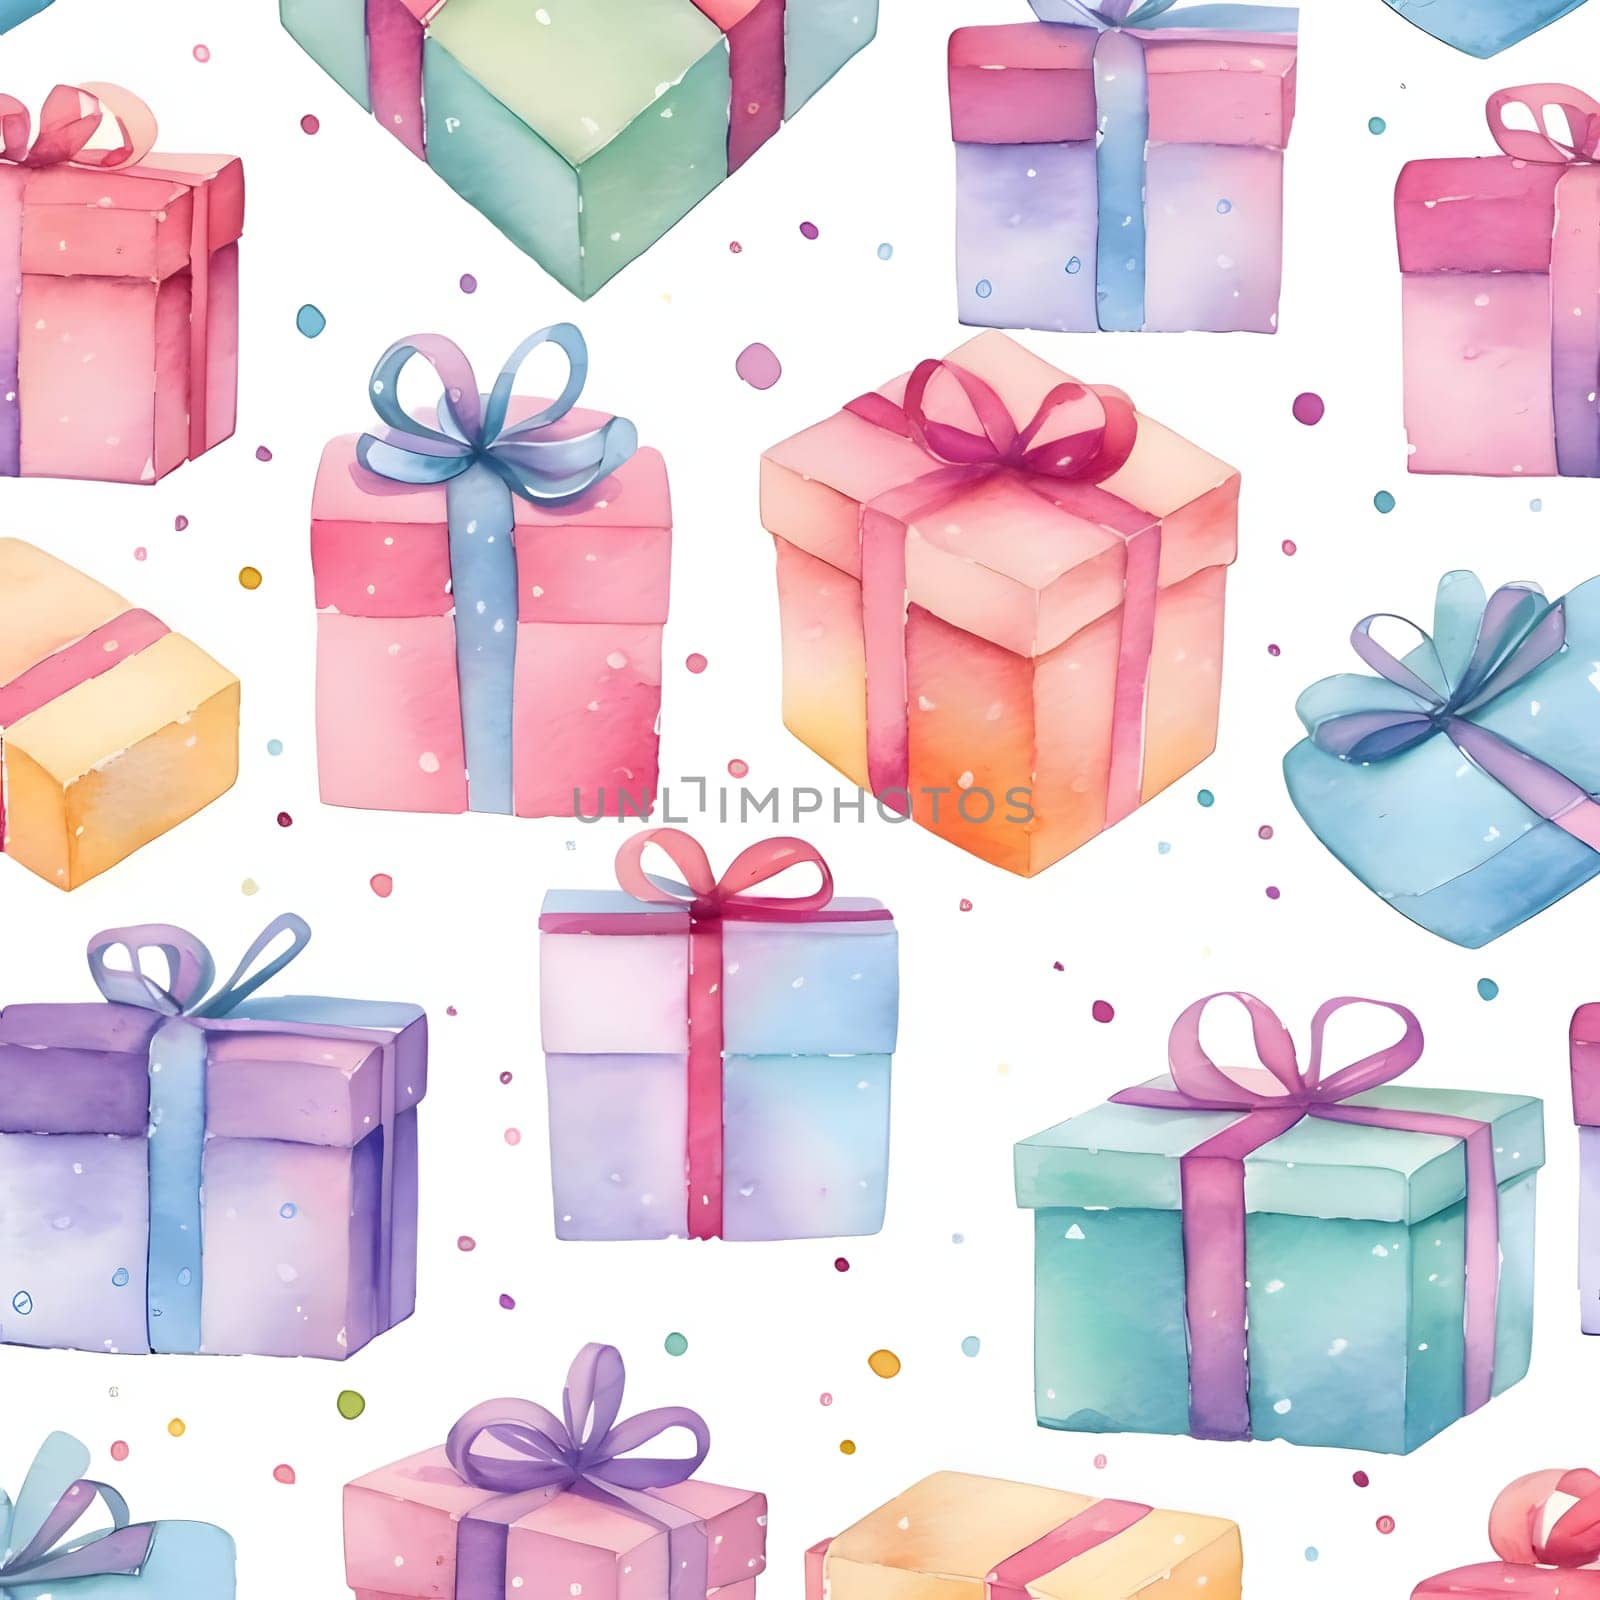 Patterns and banners backgrounds: Watercolor seamless pattern with colorful gift boxes. Hand painted illustration.